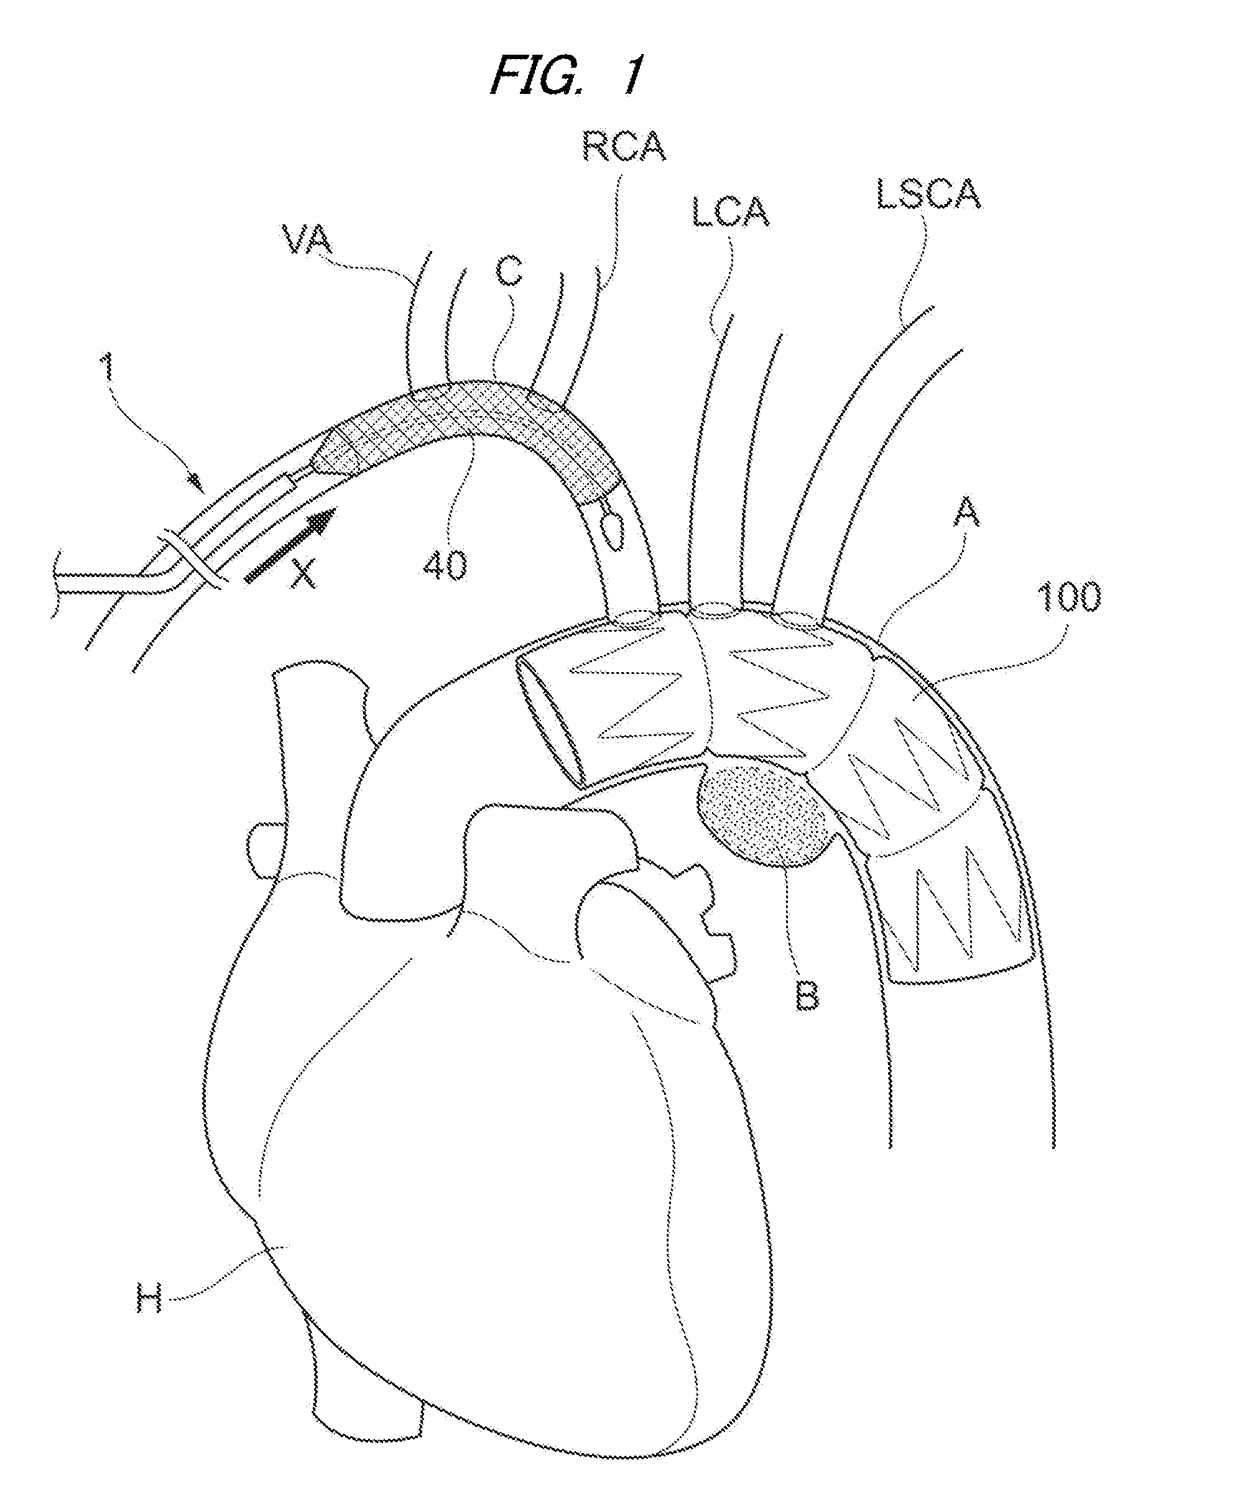 Infarction prevention device and treatment method